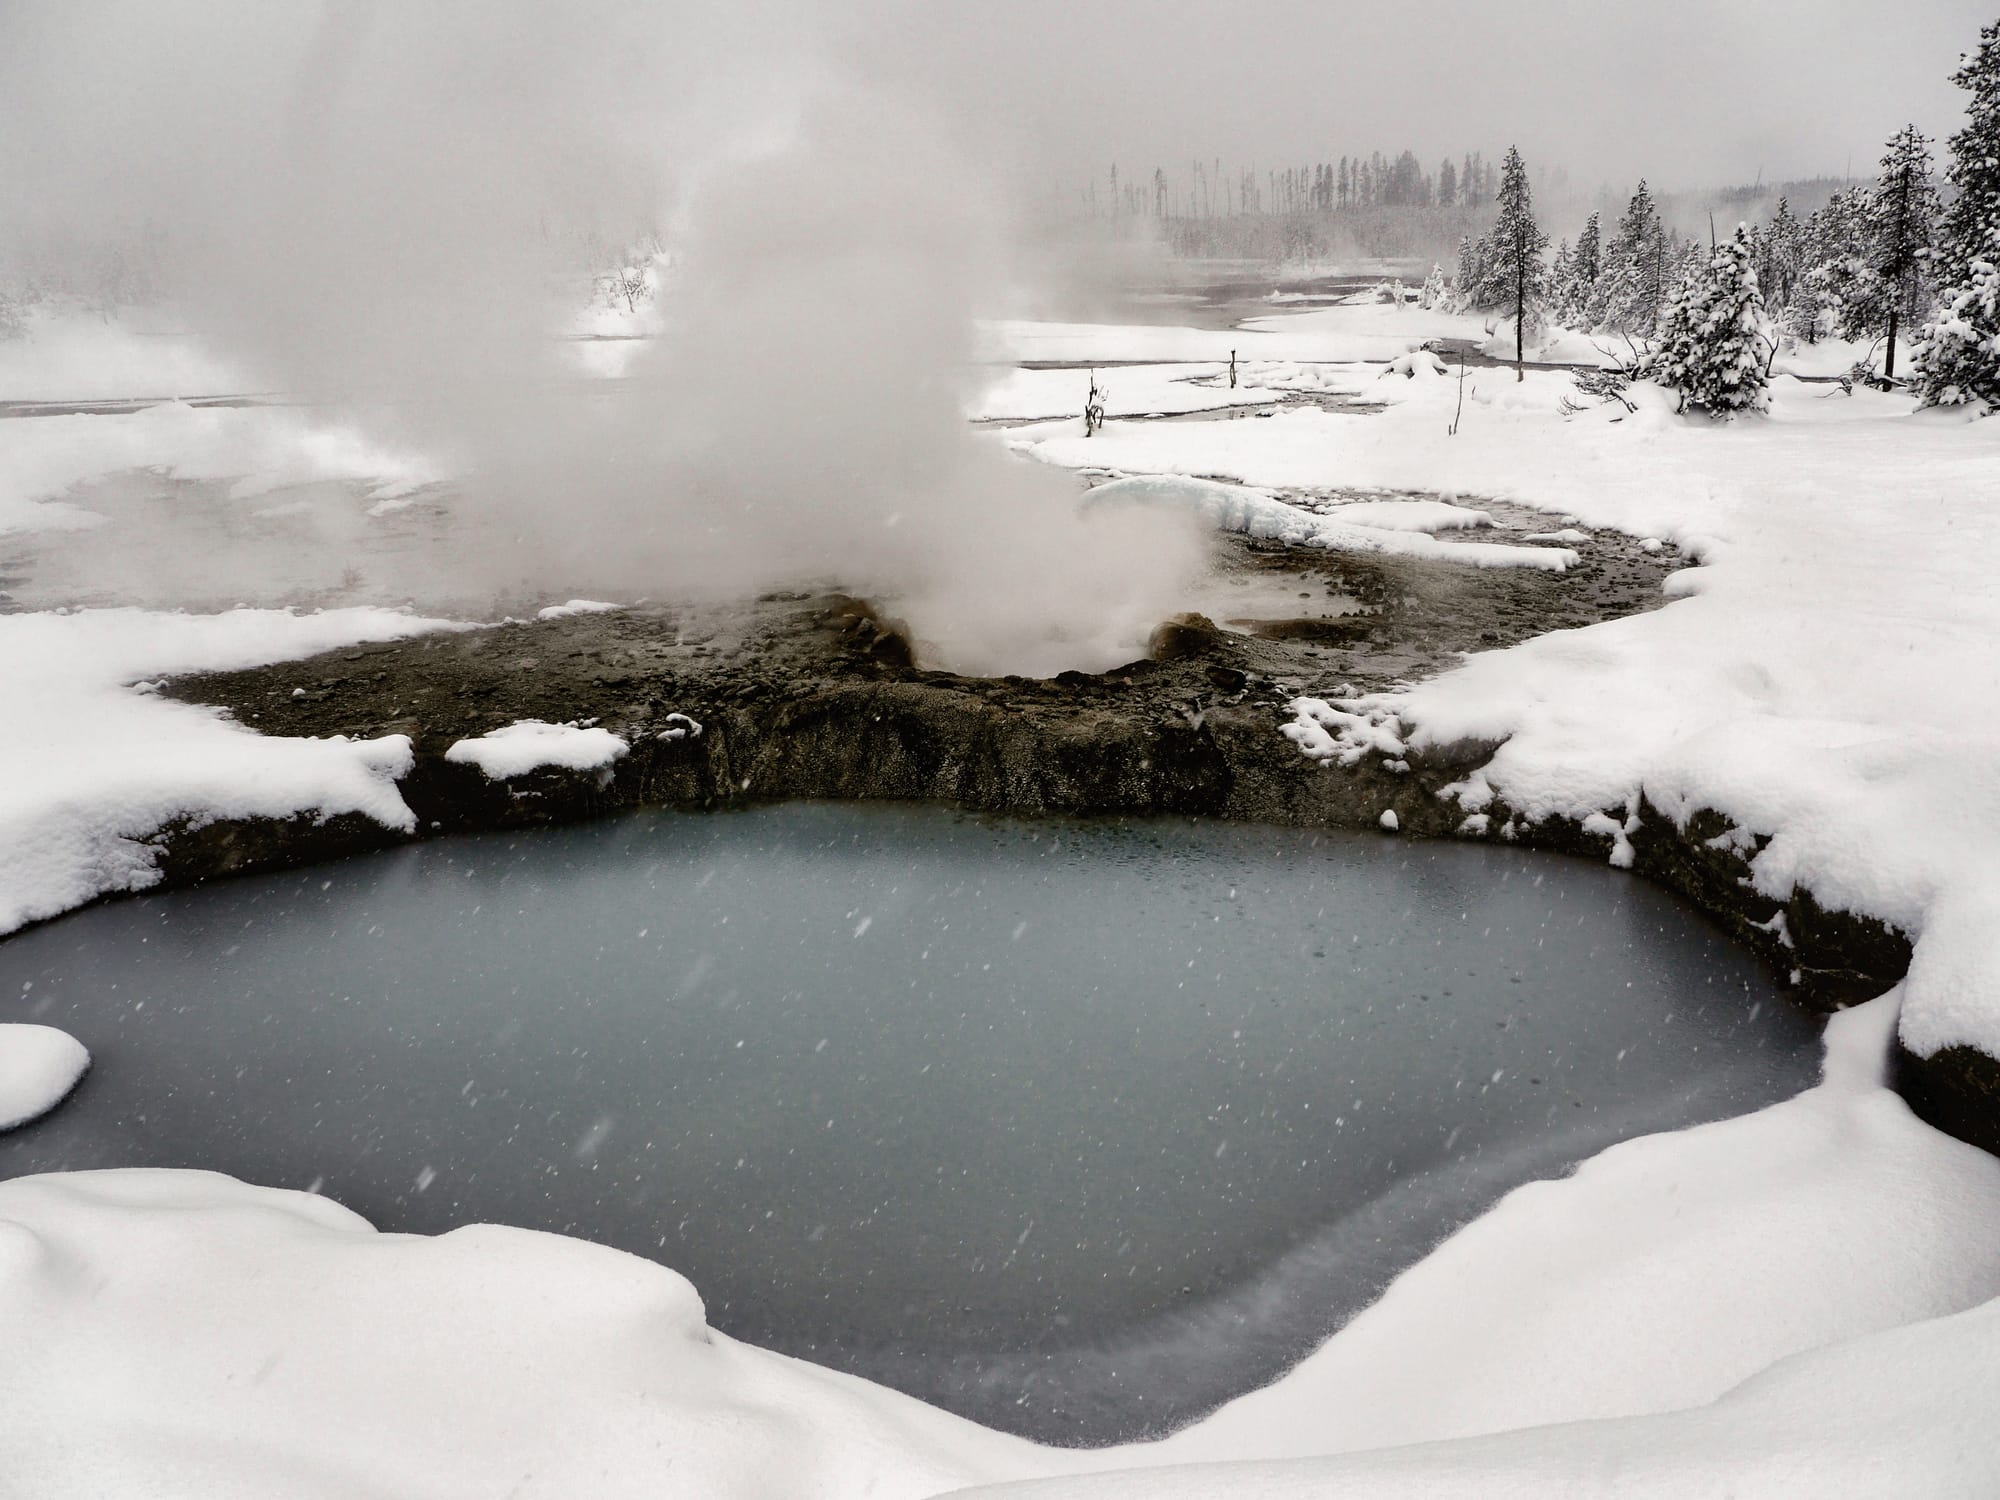 Photo by Author — thermal activity in Norris Geyser Basin